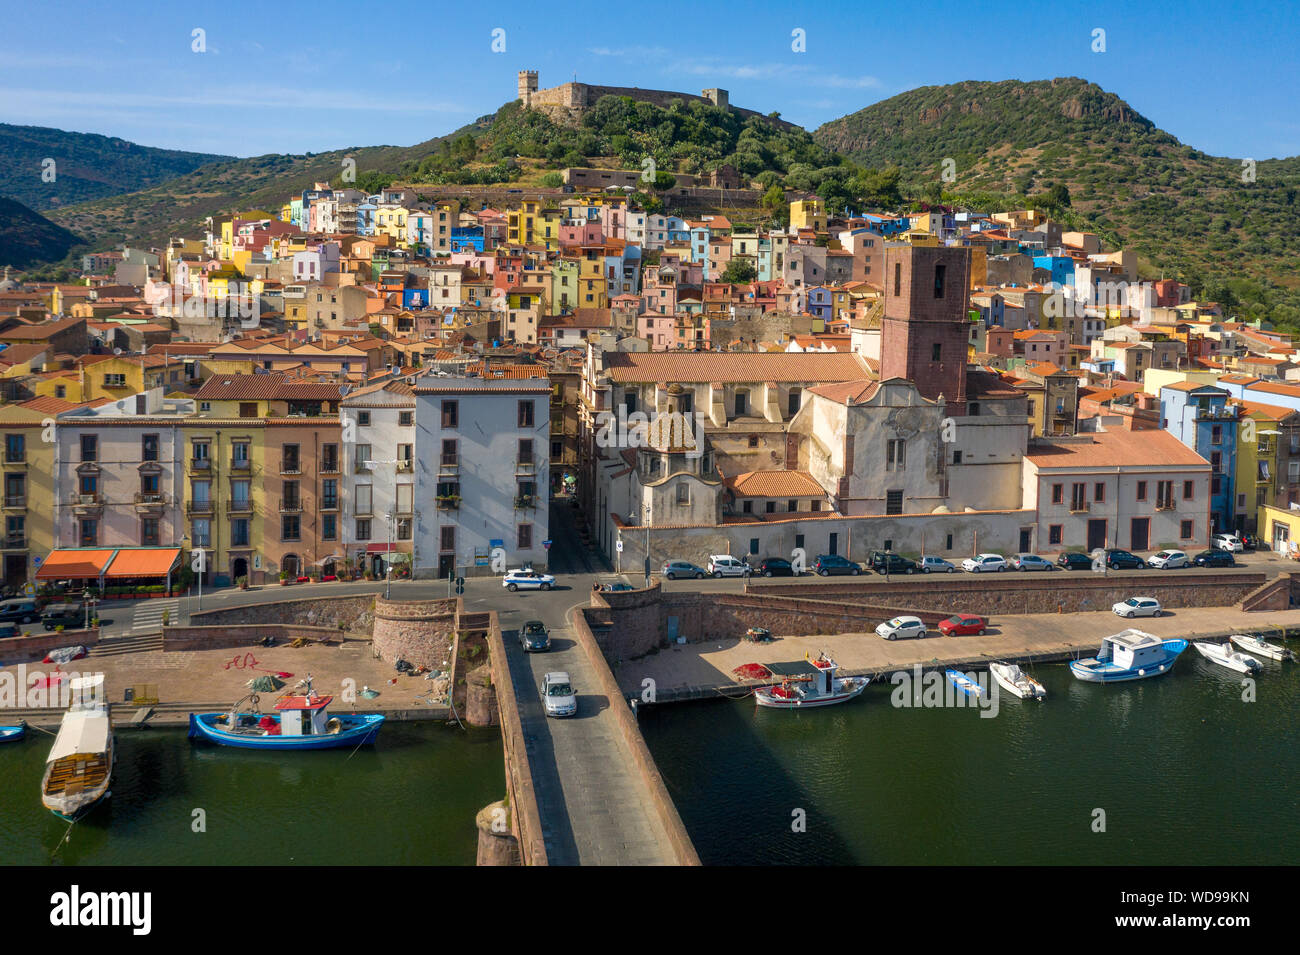 Colorful hillside houses of medieval city Bosa, Sardegna, Italy. Beautiful Mediterranean old town with castle on the hill. At down, bridge over Temo r Stock Photo